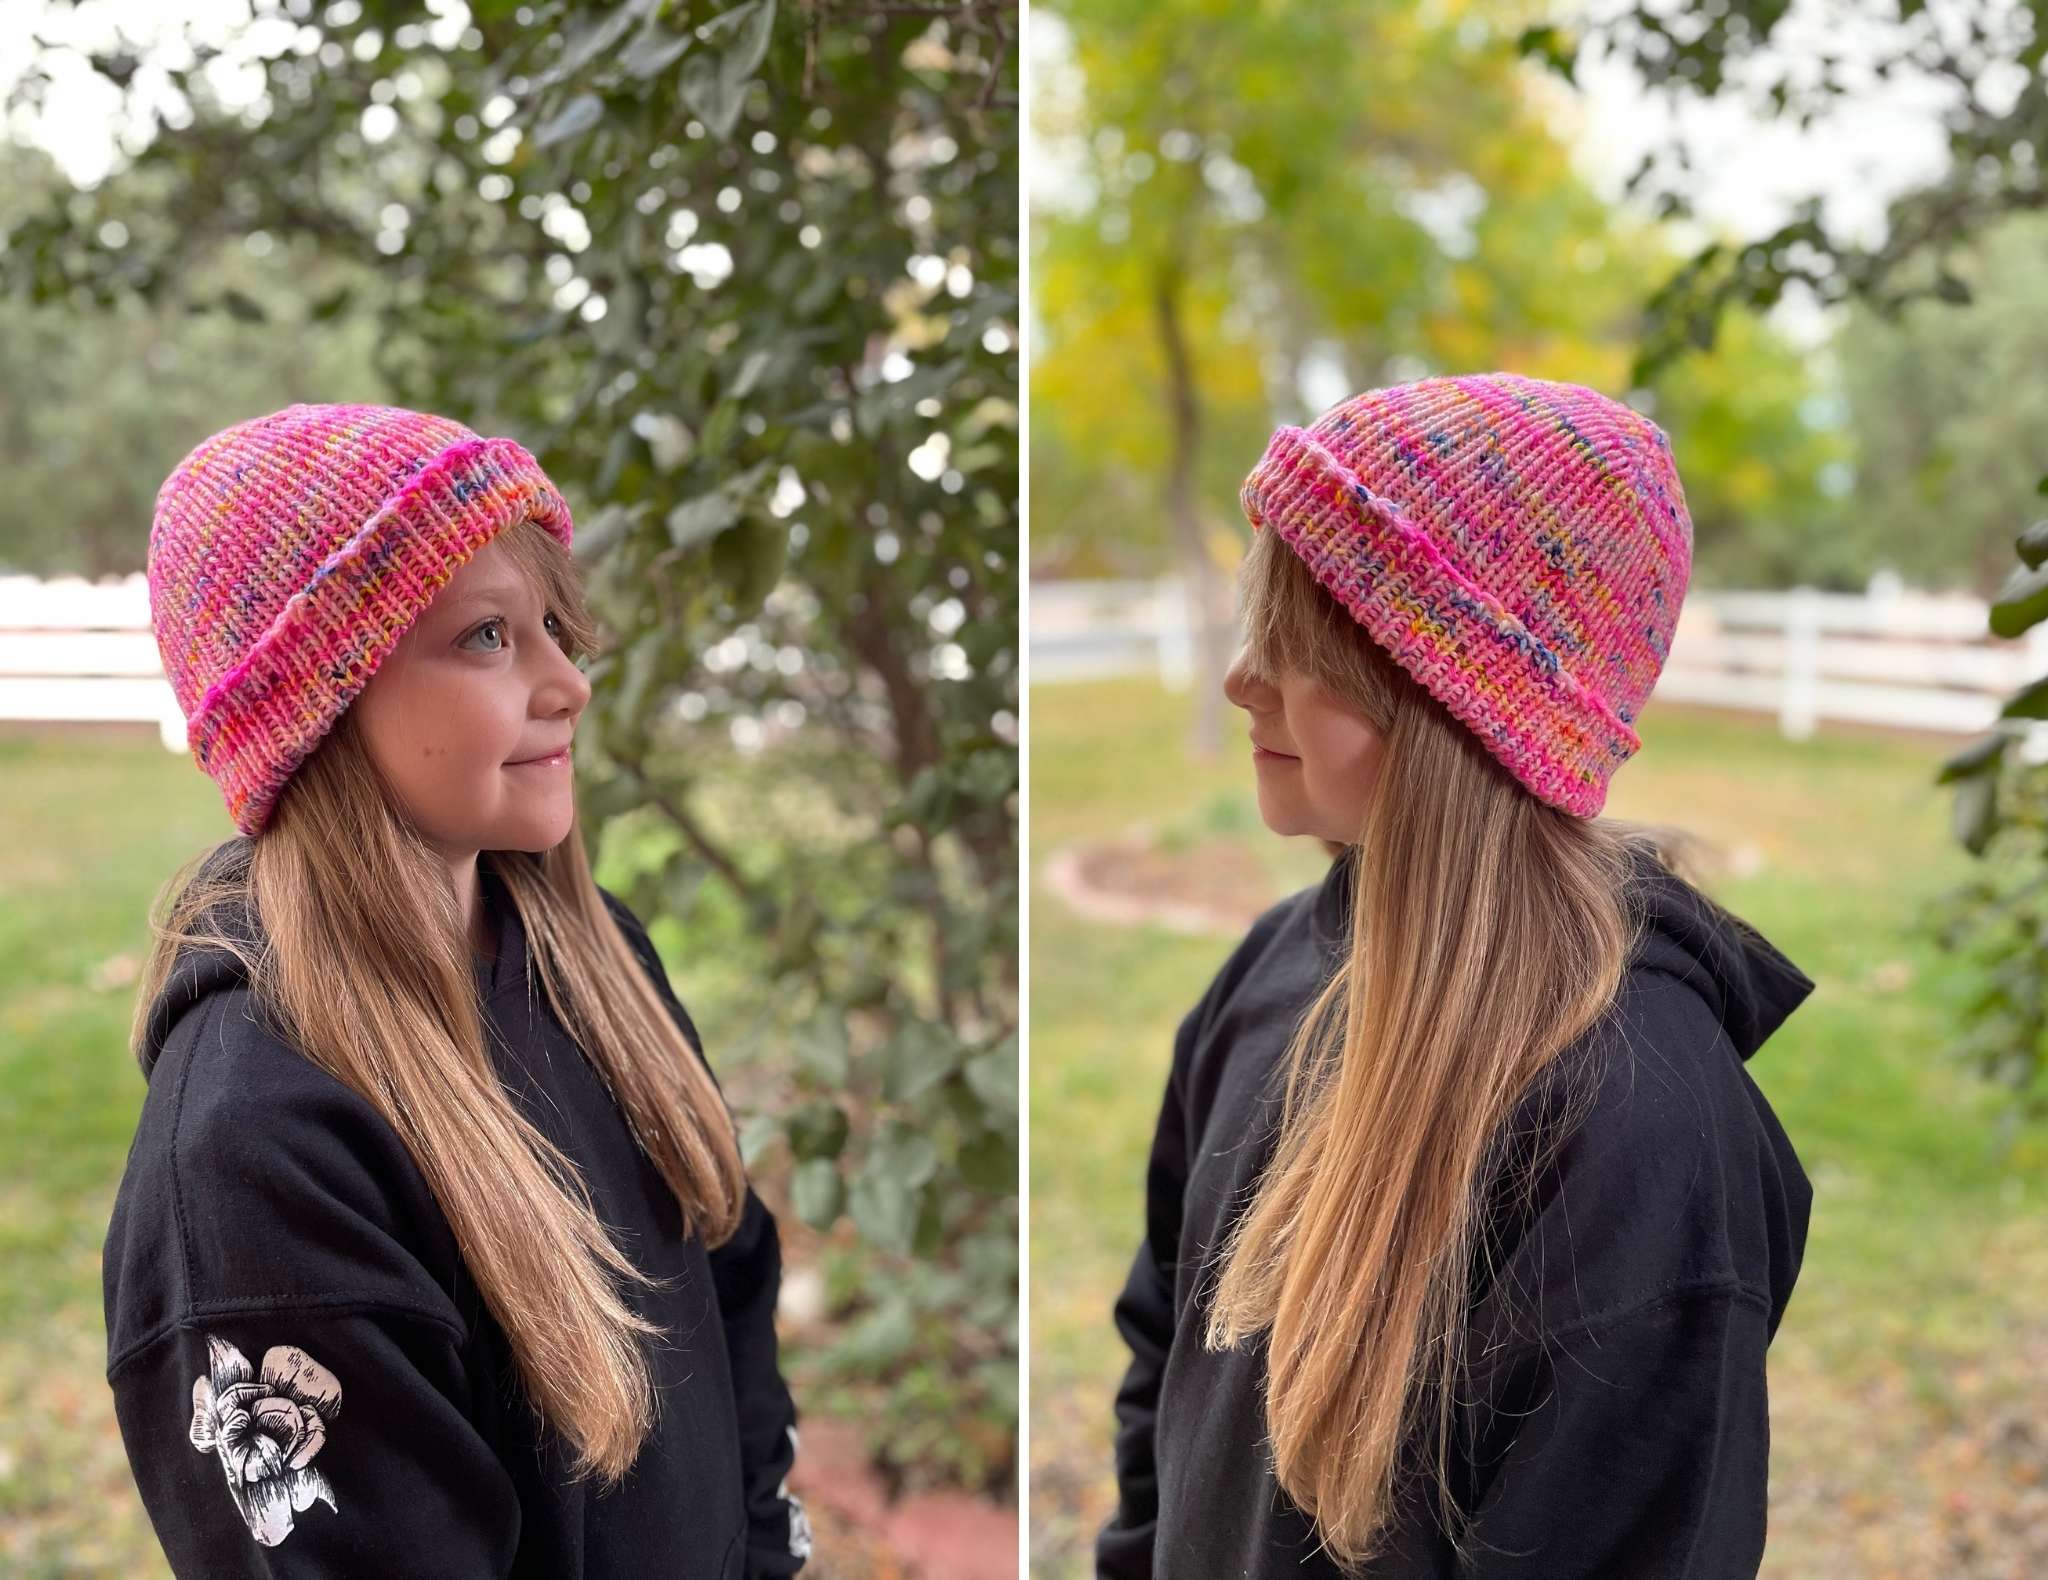 a young teenager with long brown hair is photographed in a park wearing a black hoodie and a bright pink hat. The hat has variegated shades of pink, yellow and dark grey and is worn with the brim turned up.